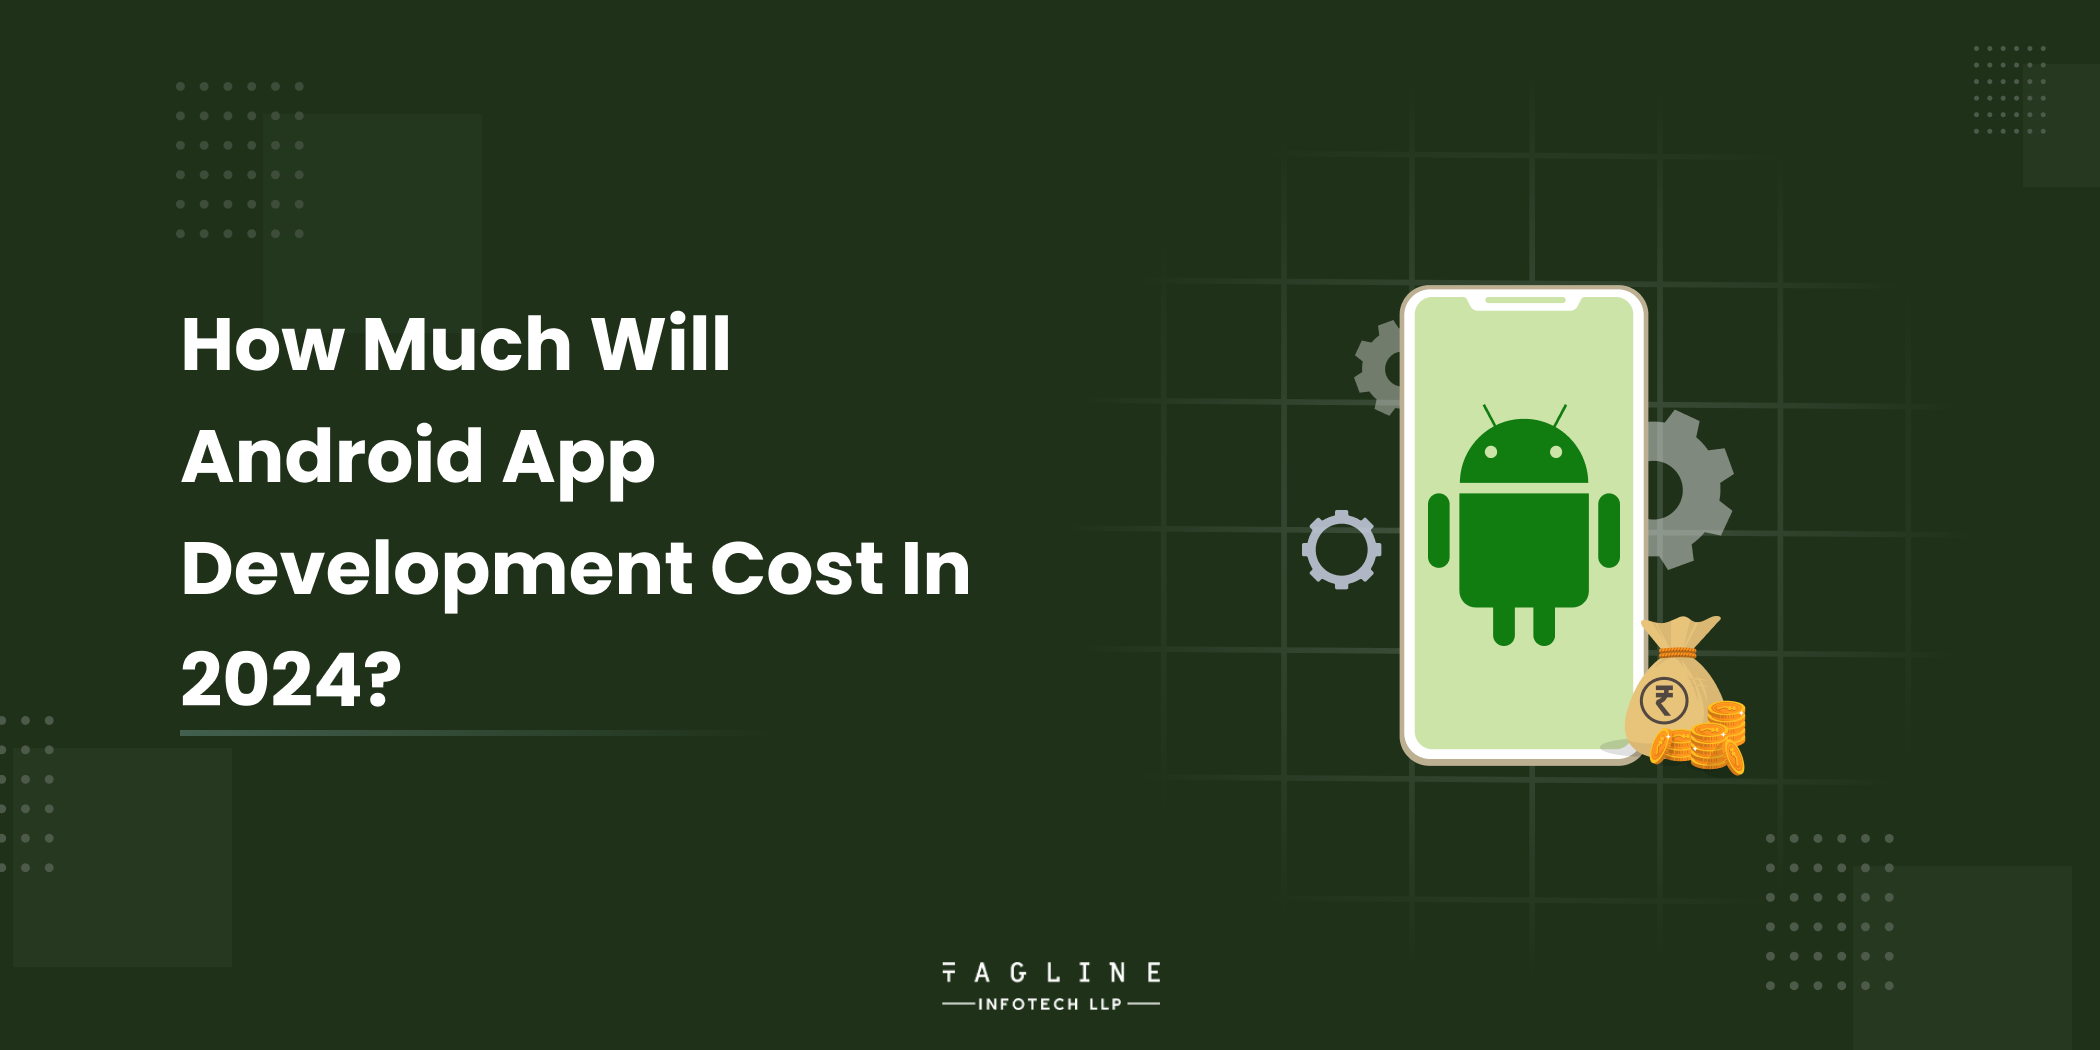 How much will Android app development cost in 2024?